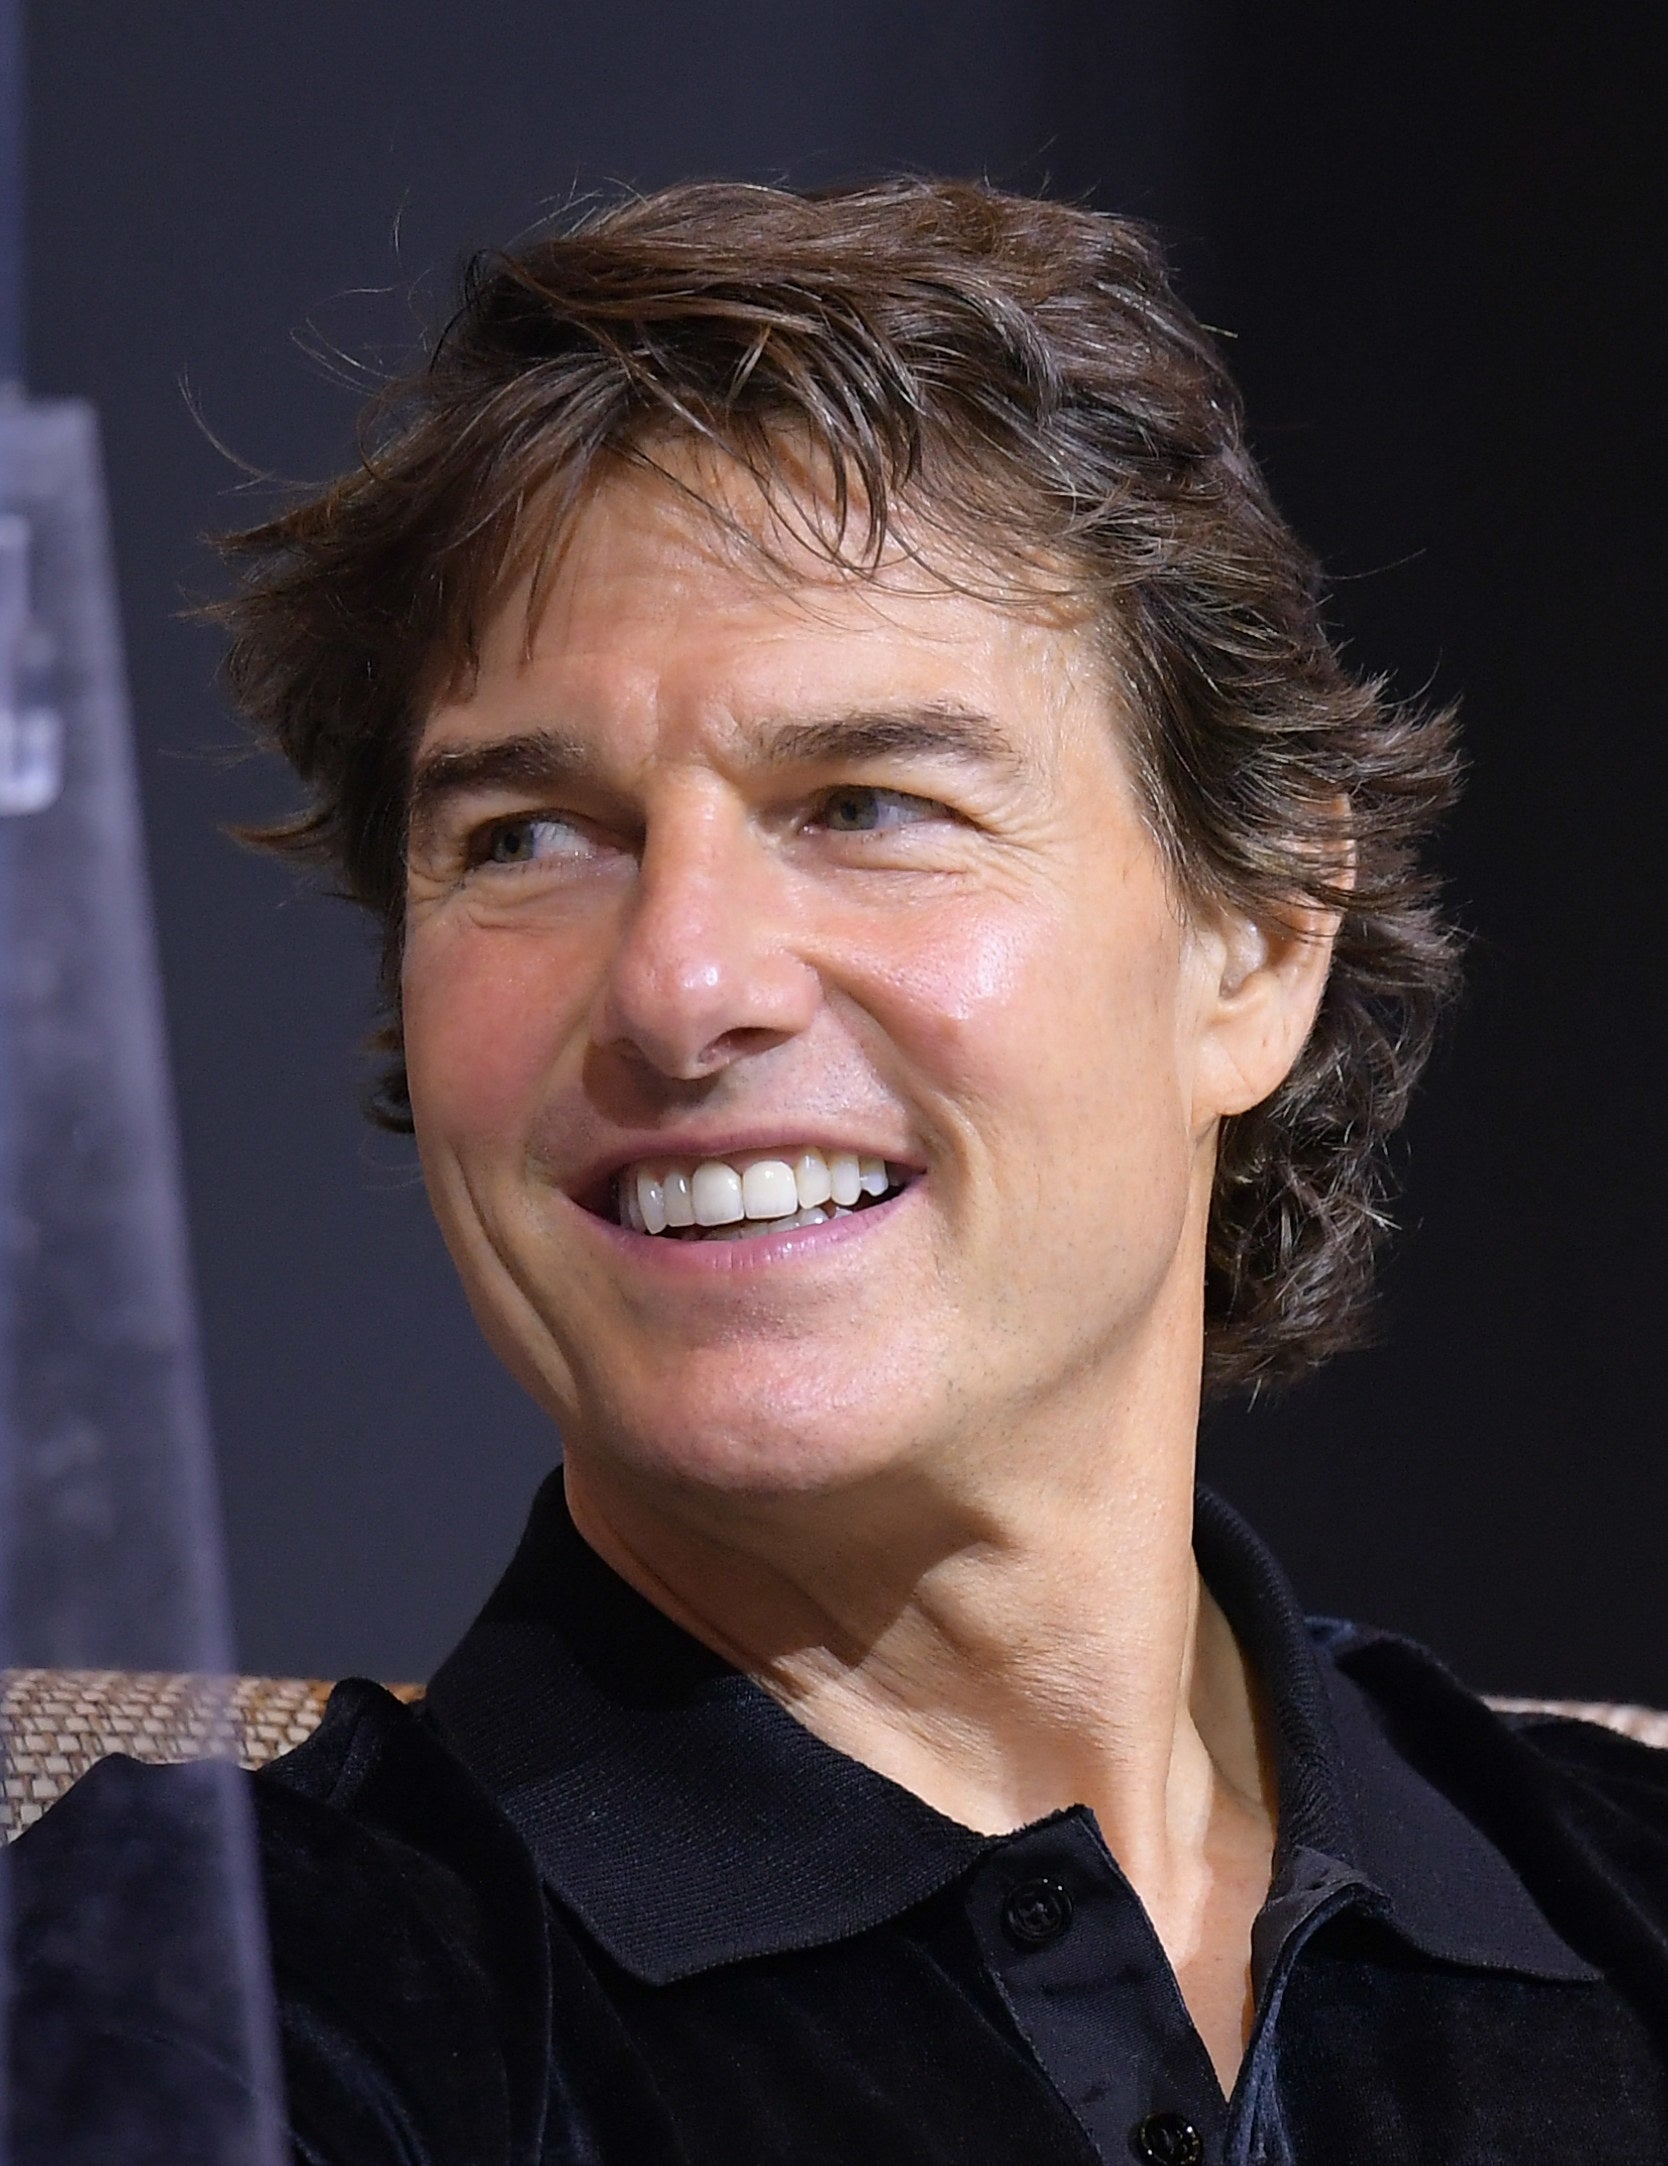 Tom Cruise during a press conference